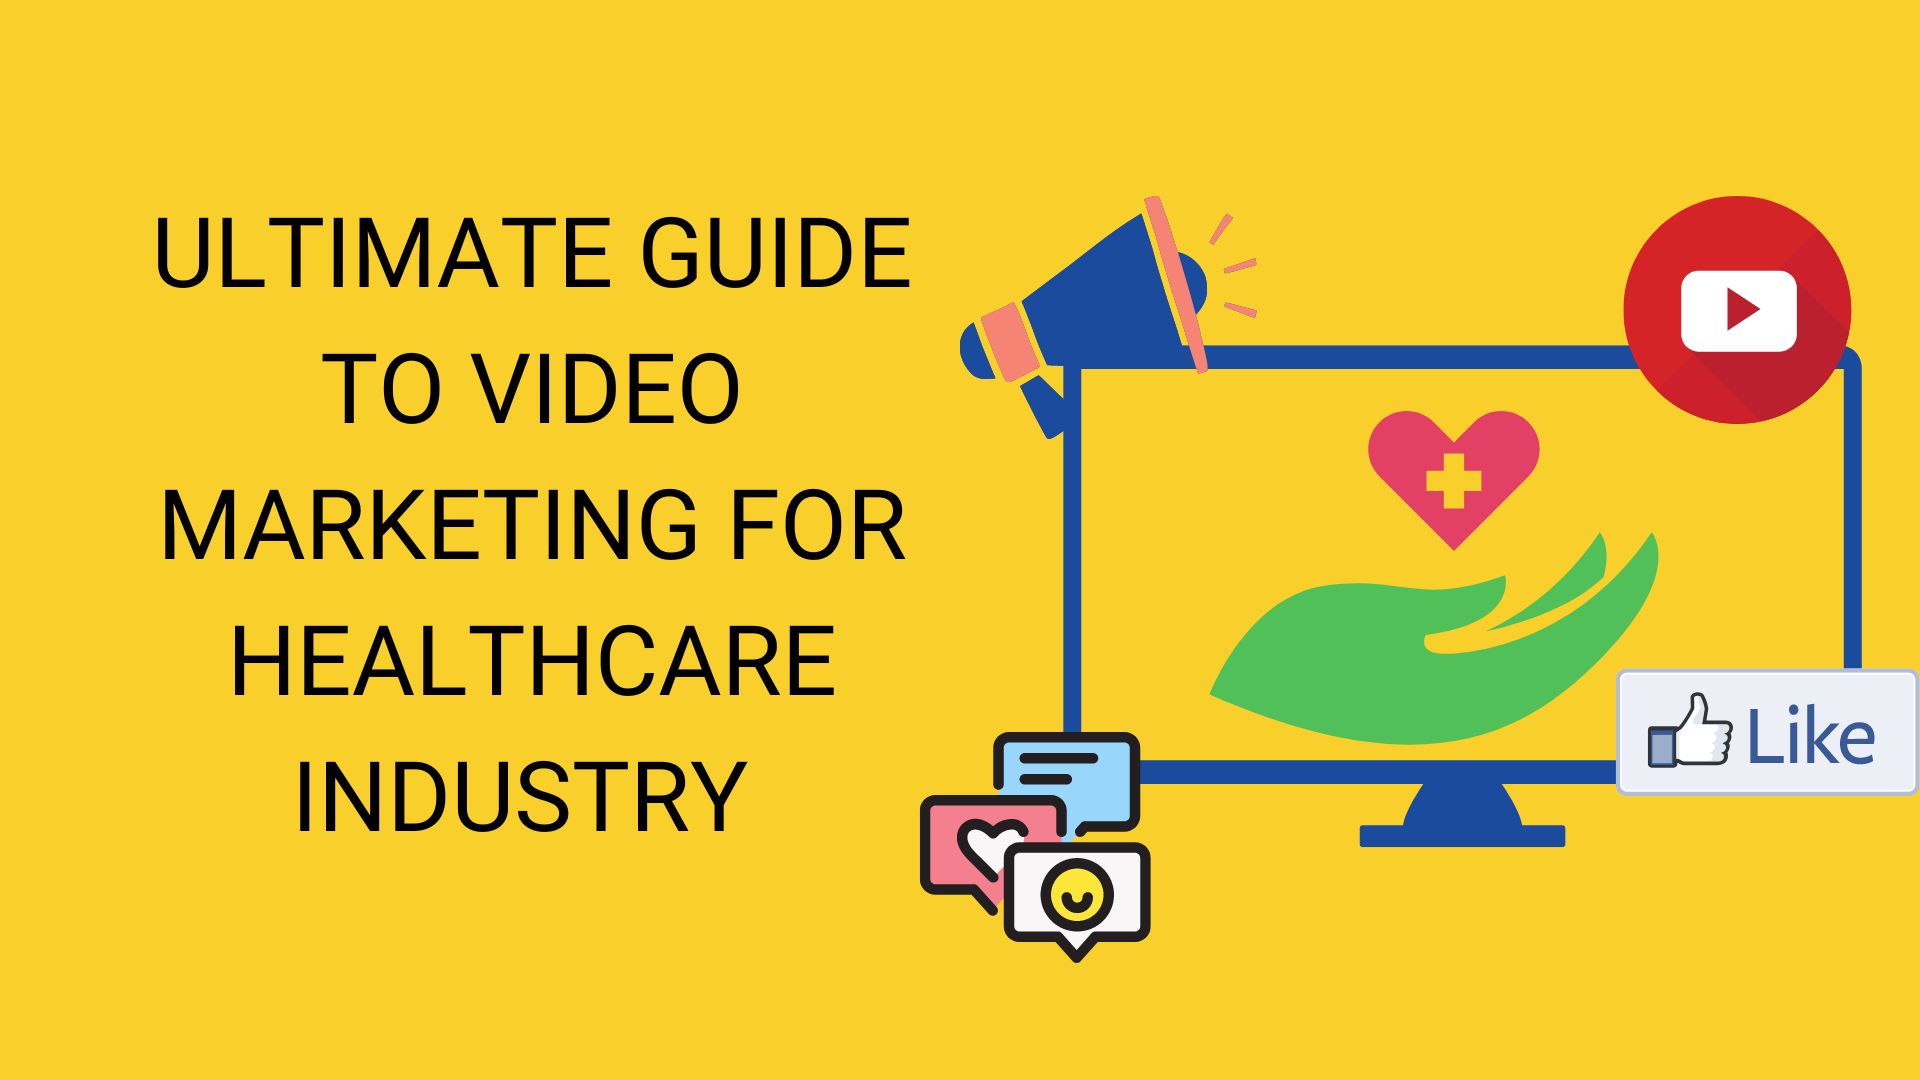 Video marketing for healthcare industry